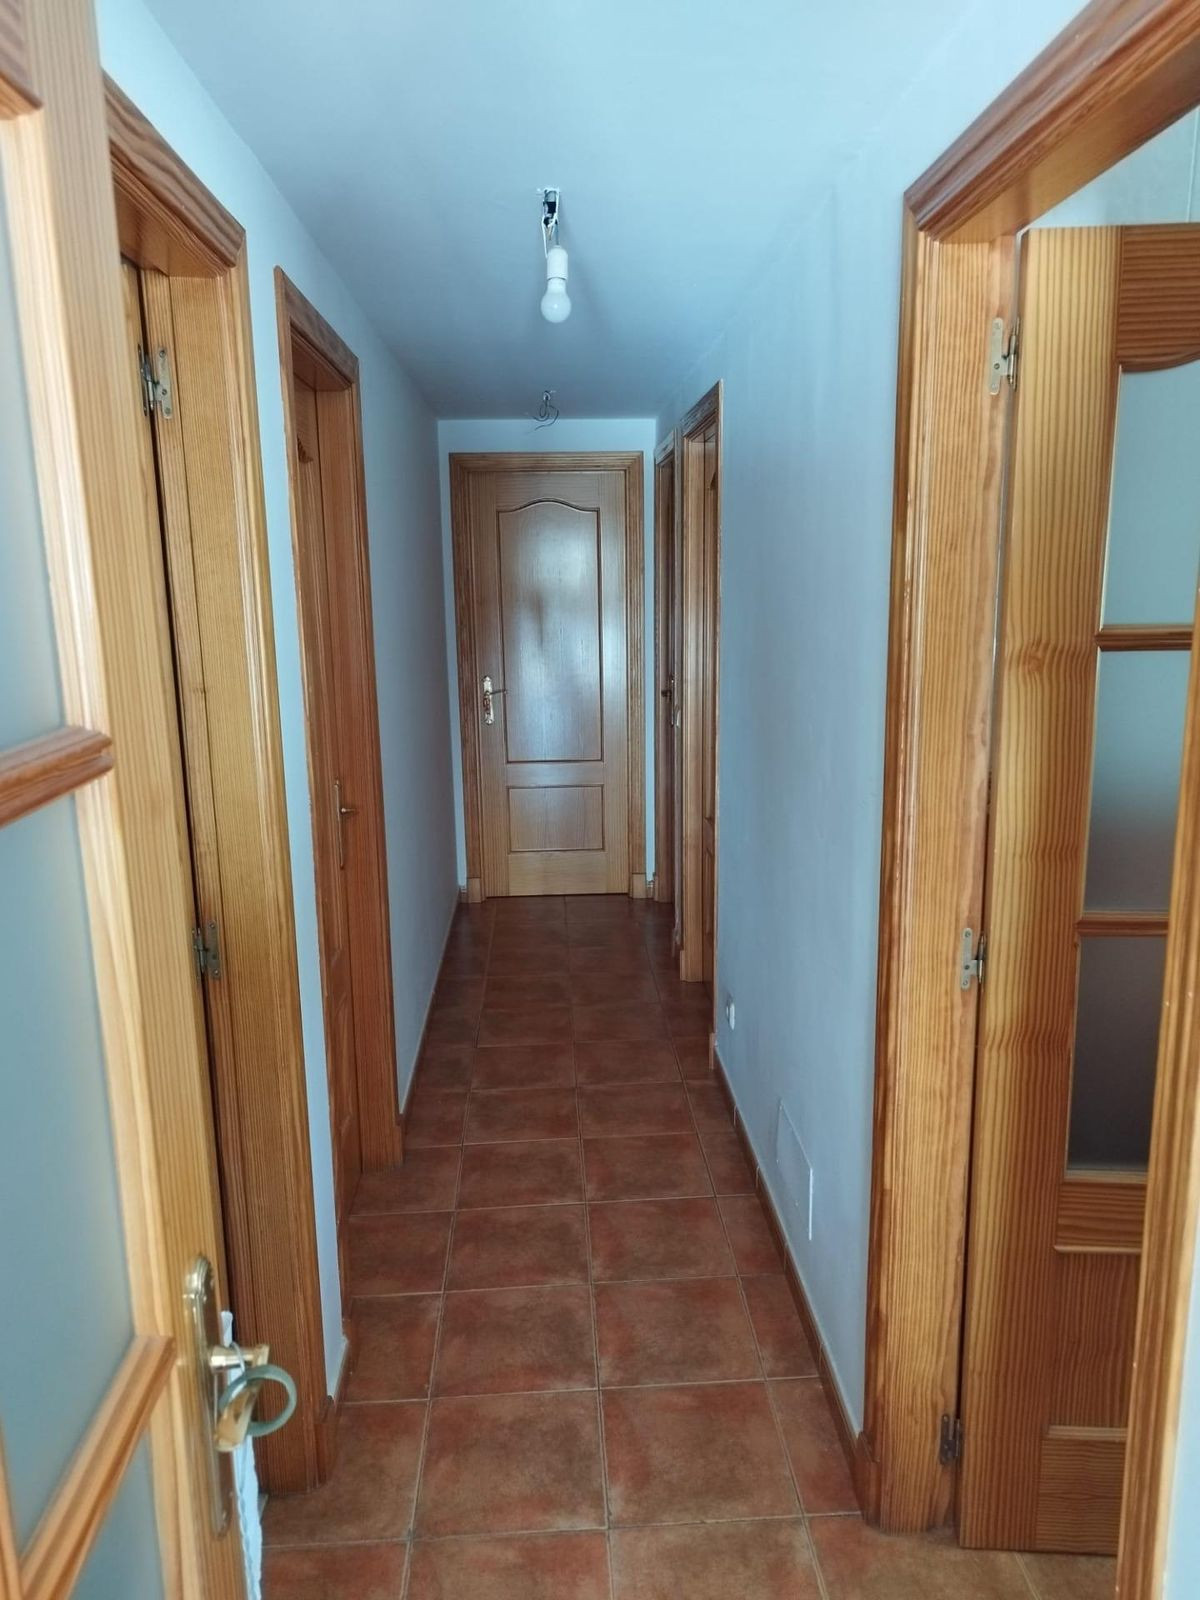 3 Bedroom Penthouse Apartment For Sale Tolox